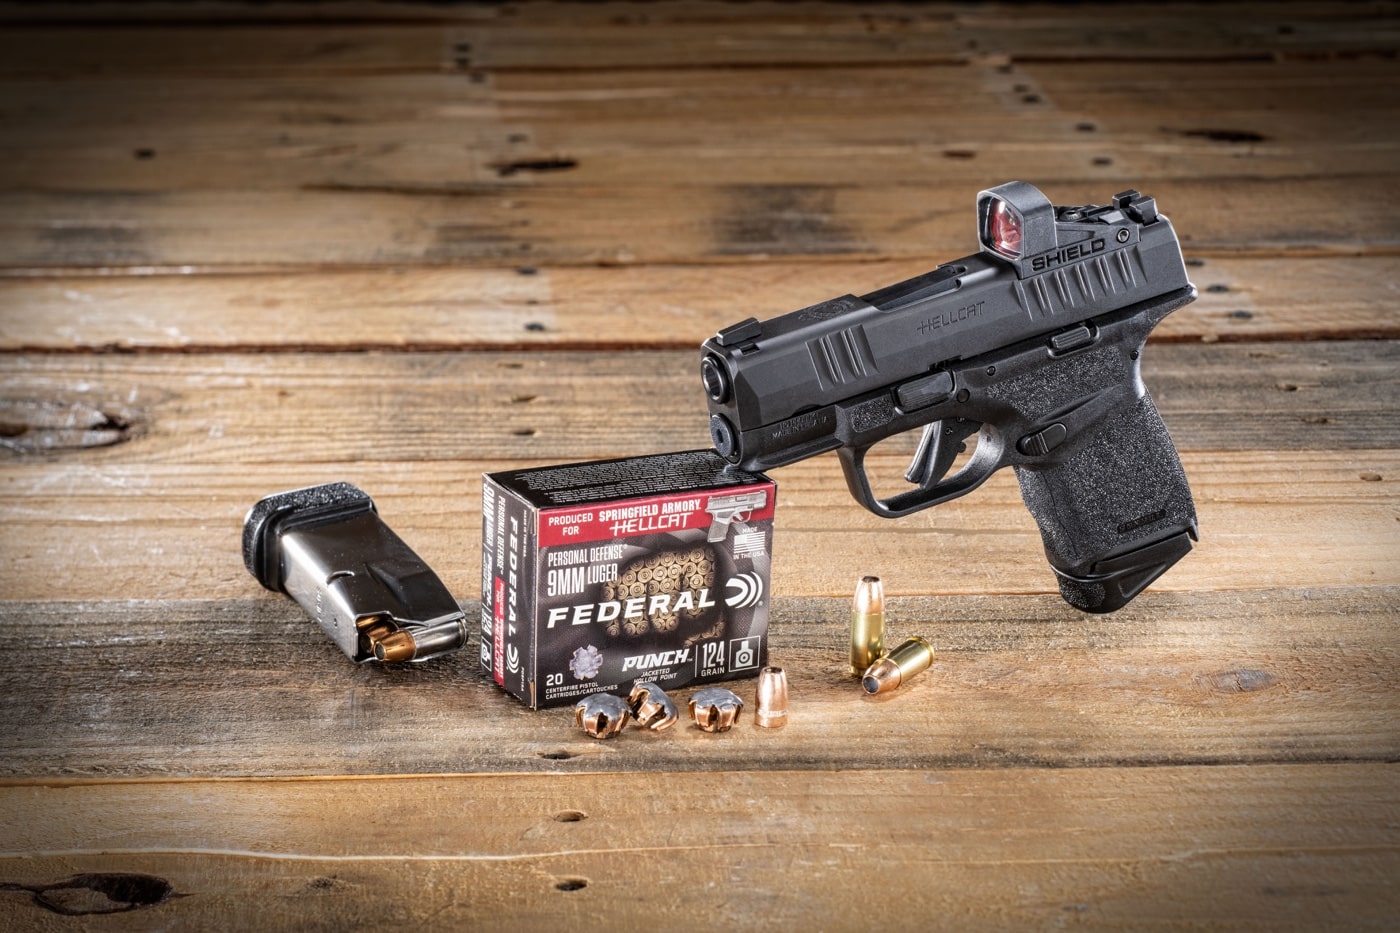 In this image, the the author placed the Federal Punch 9mm ammo next to the Springfield Armory Hellcat pistol. Also seen in the image is a spare magazine, bullets, expensed bullets and loaded cartridges. A Shield red dot sight is the optic mounted on the slide of the CCW handgun.